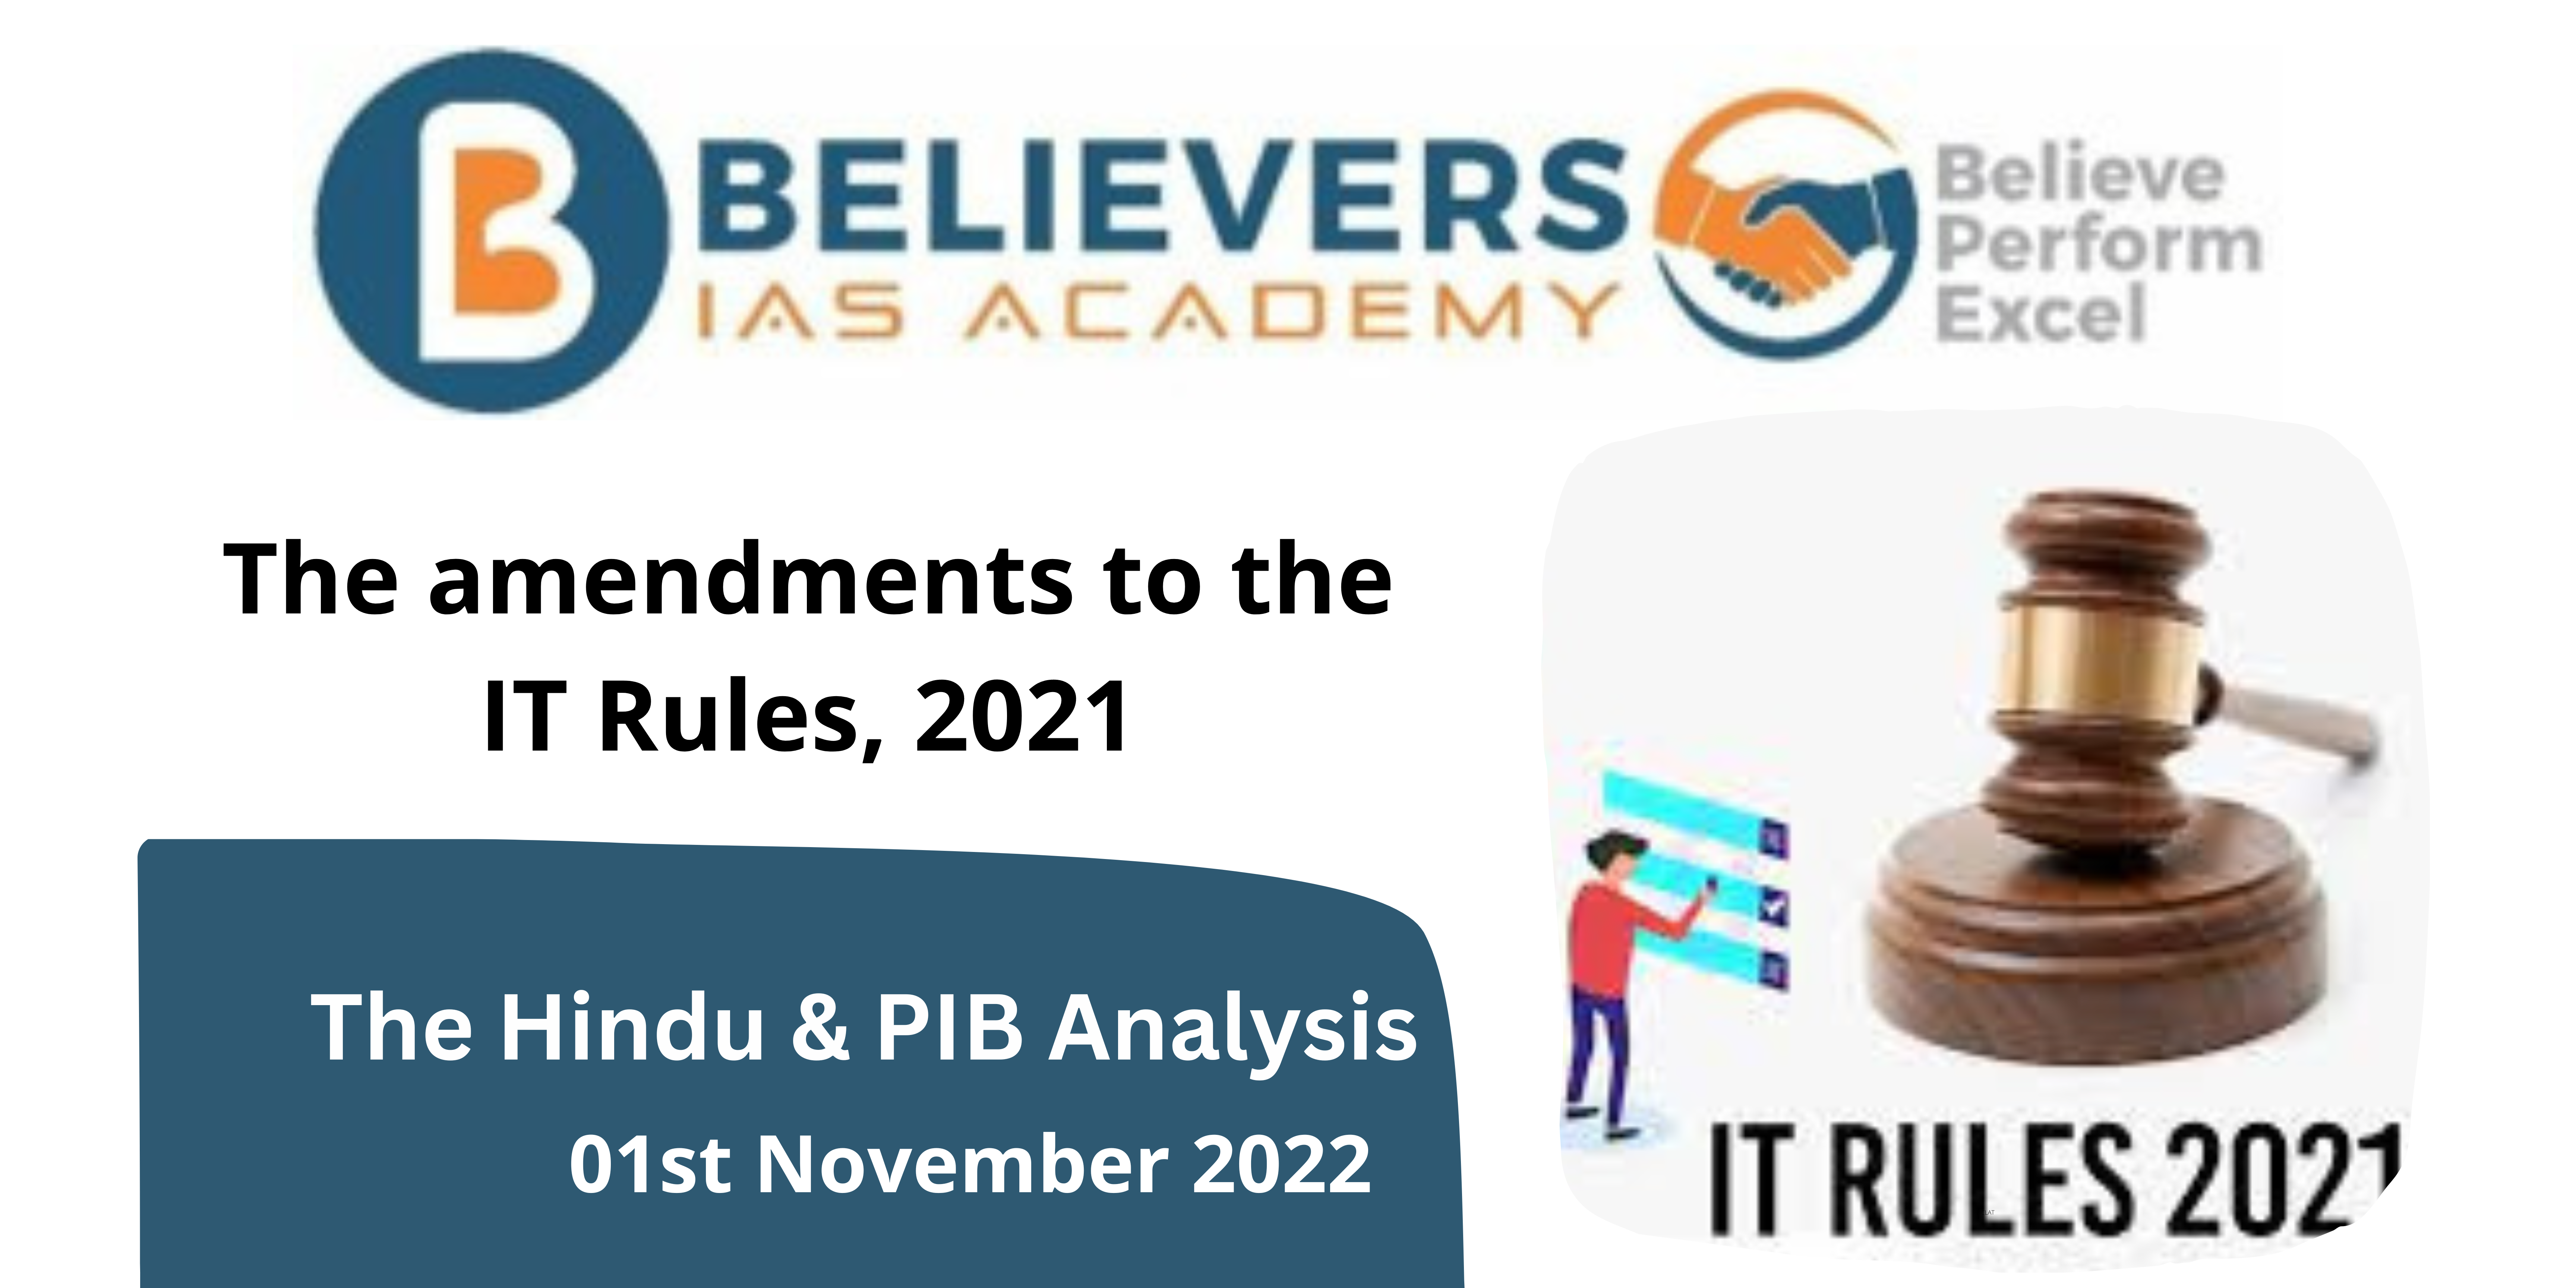 The amendments to the IT Rules, 2021